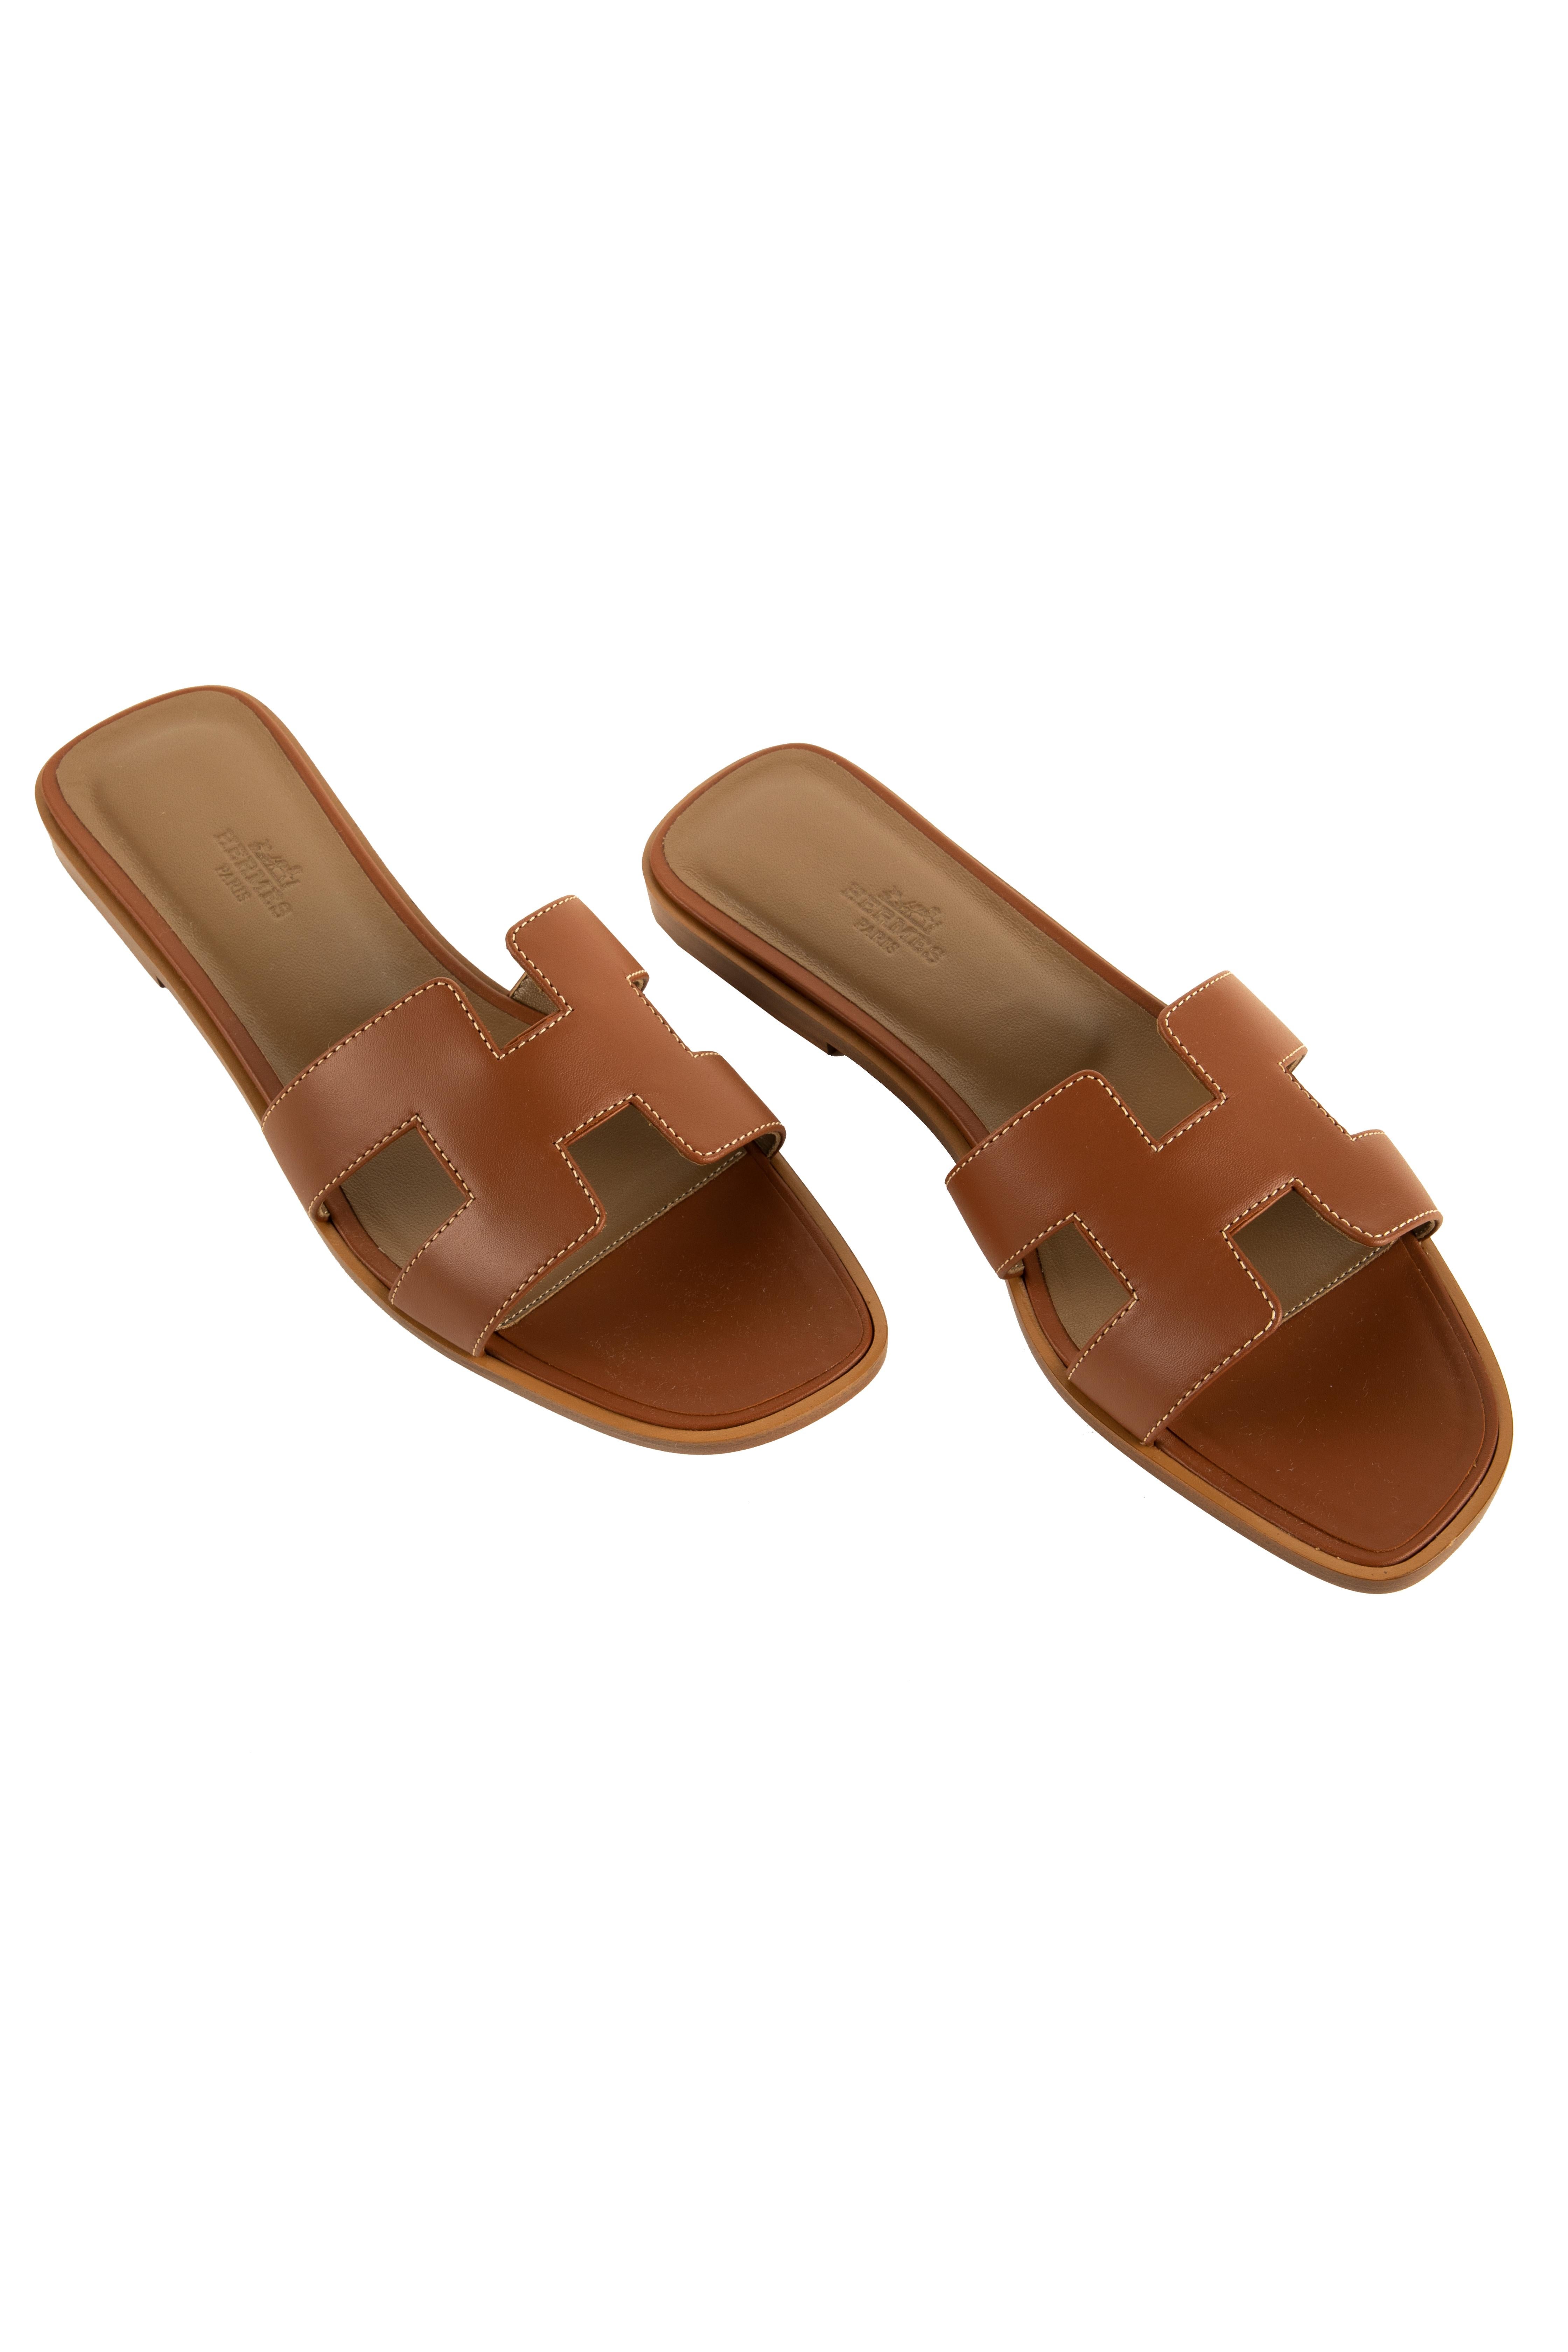 1stdibs Exclusives From Three Over Six

Brand: Hermes
Style: Oran Sandal
Size: 39FR
Color: Gold
Leather: Box Leather
Year: 2021

Condition: Pristine, never used: The item has never been used and is in pristine condition complete with all